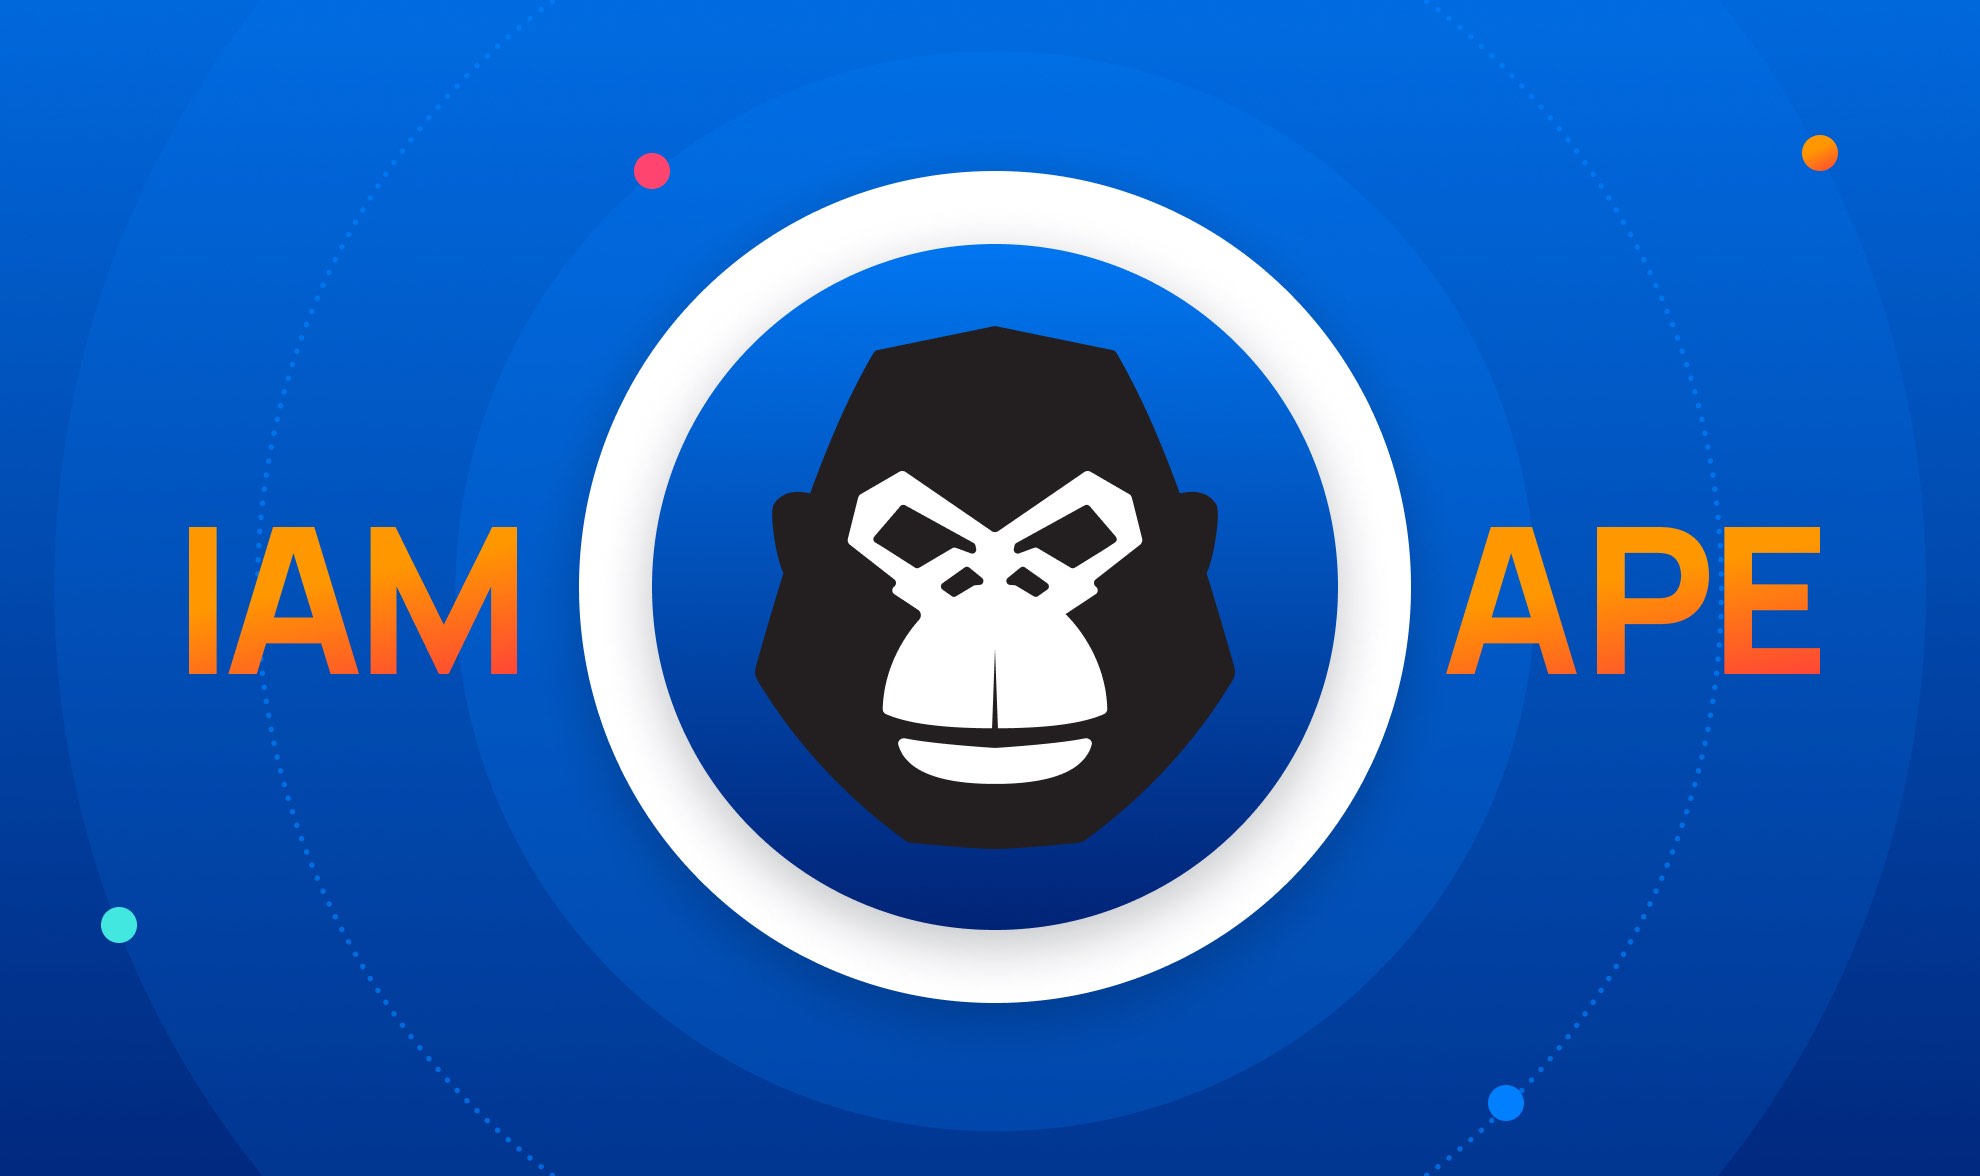 Meet IAM APE: An Open Source Tool to Simplify AWS IAM Policy Management